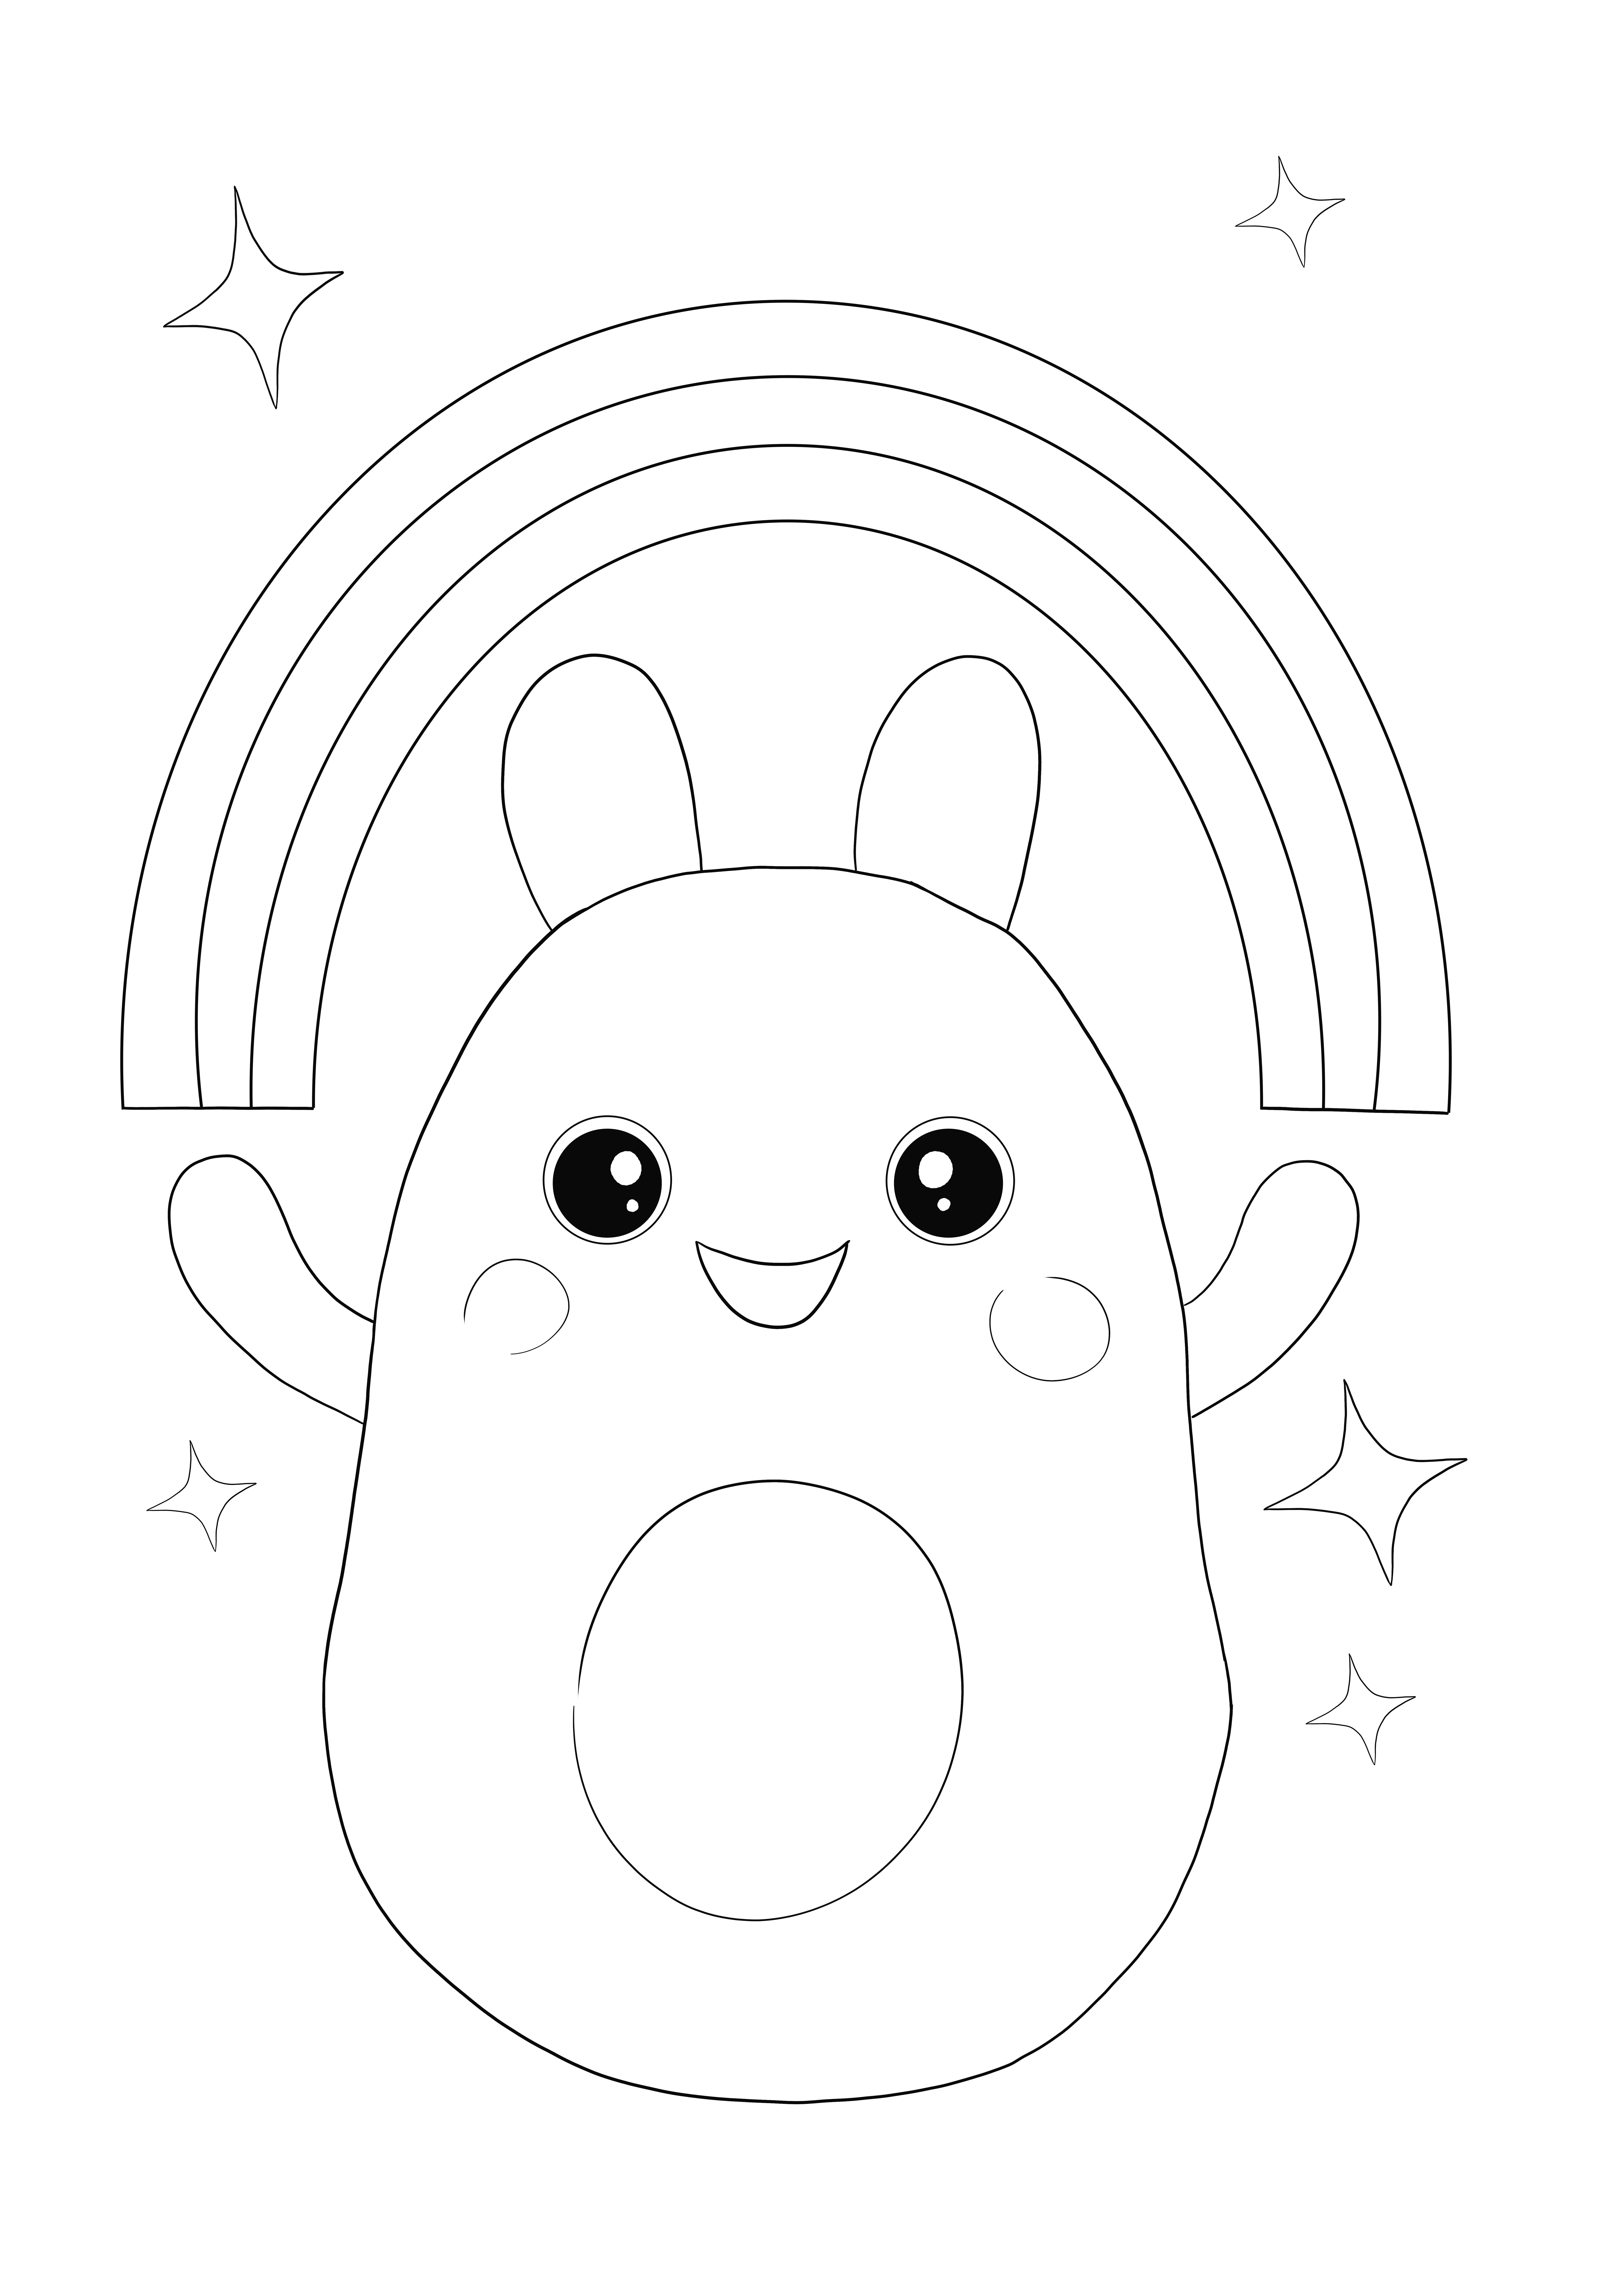 Kawaii Rainbow is a simple coloring sheet for free downloading or printing